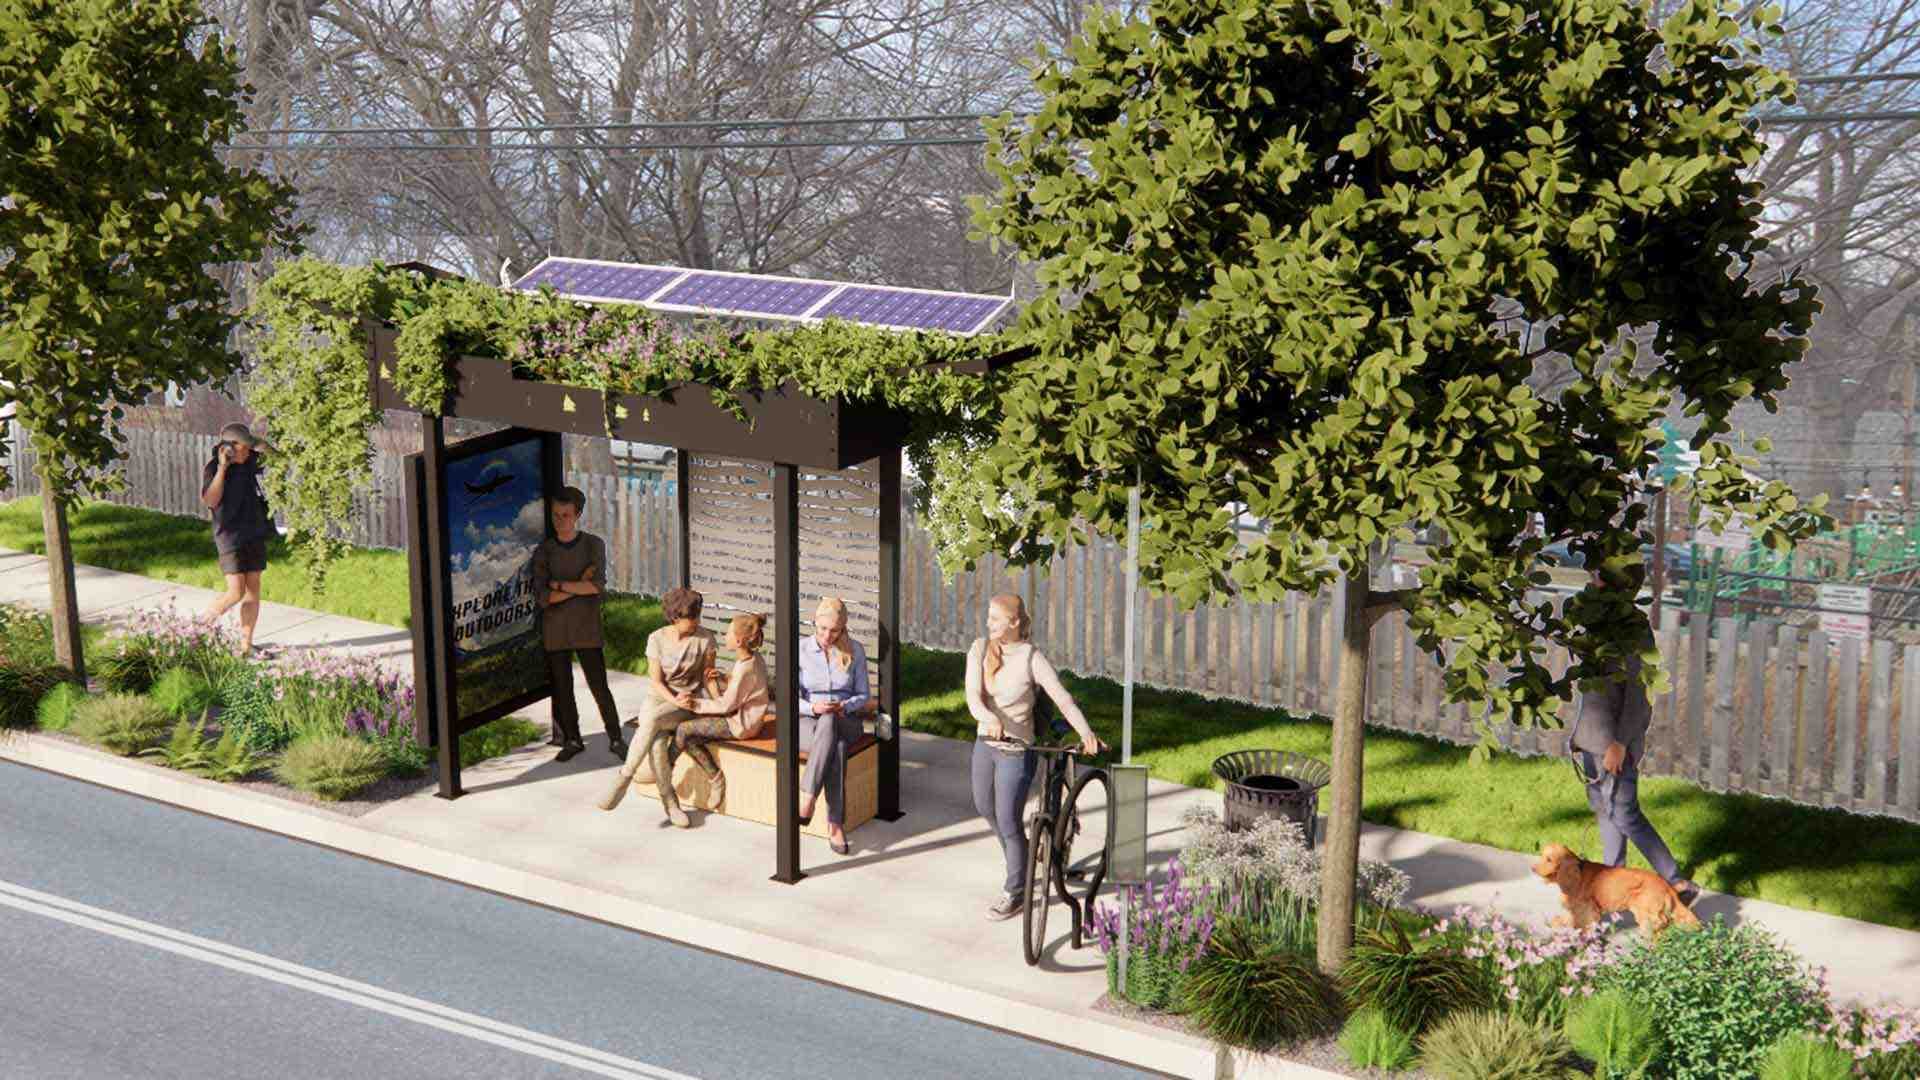 people sit in plant-topped bus shelter